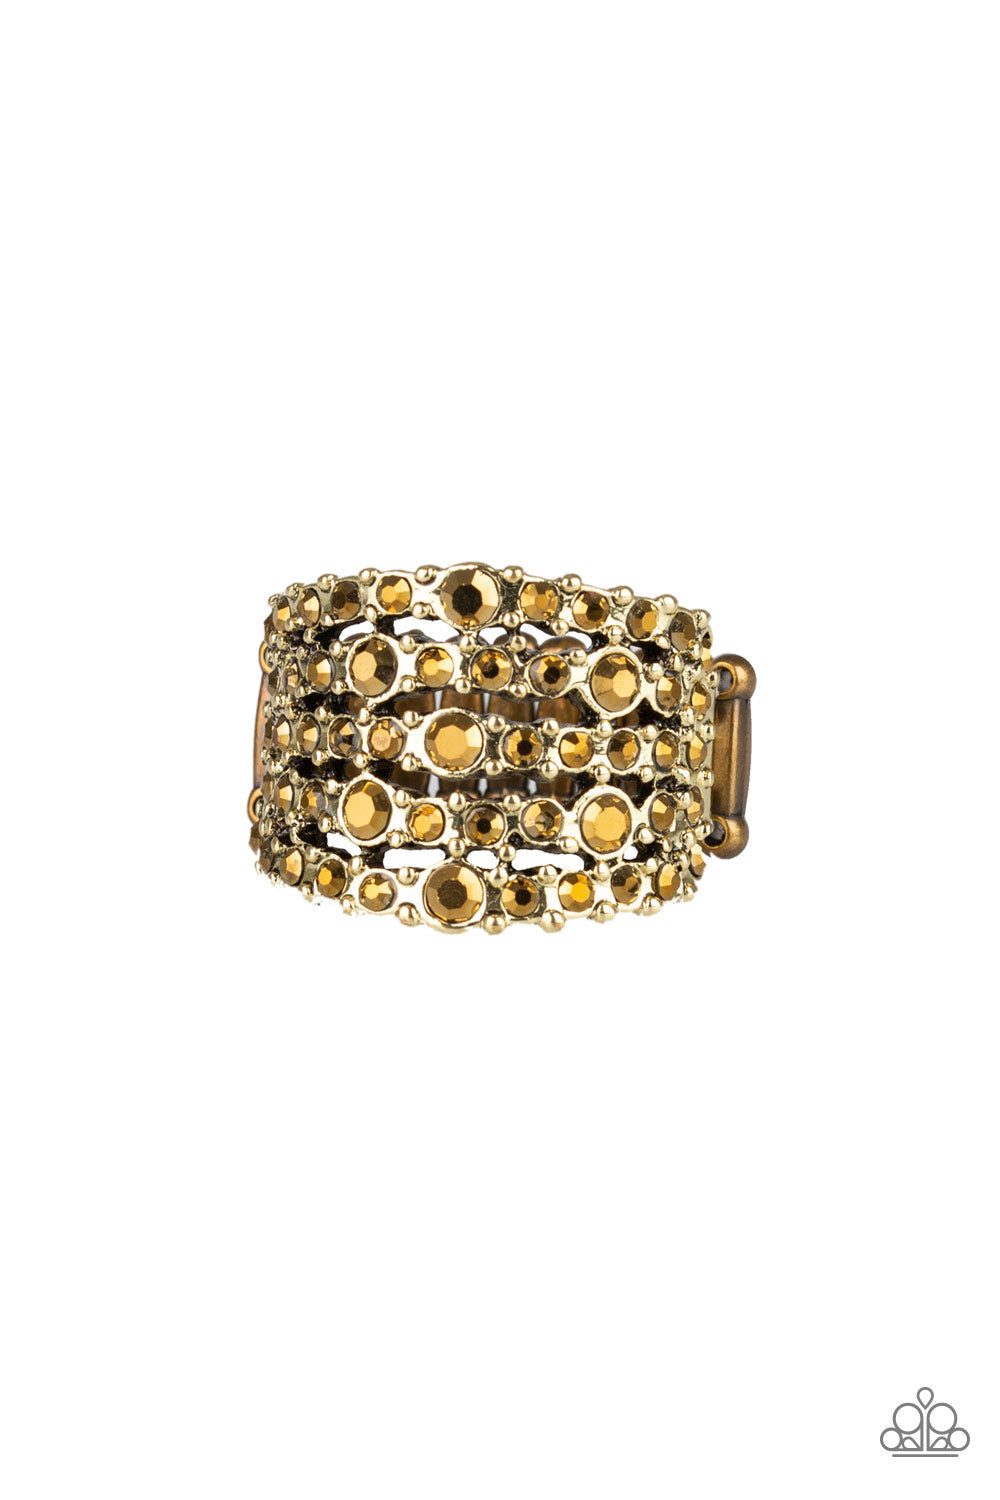 Truly Treasured - Brass Fashion Ring - Paparazzi Accessories - Row after row of glittery aurum rhinestones are encrusted along studded brass bands for a dazzling look. Features a stretchy band for a flexible fit. Sold as one individual ring.